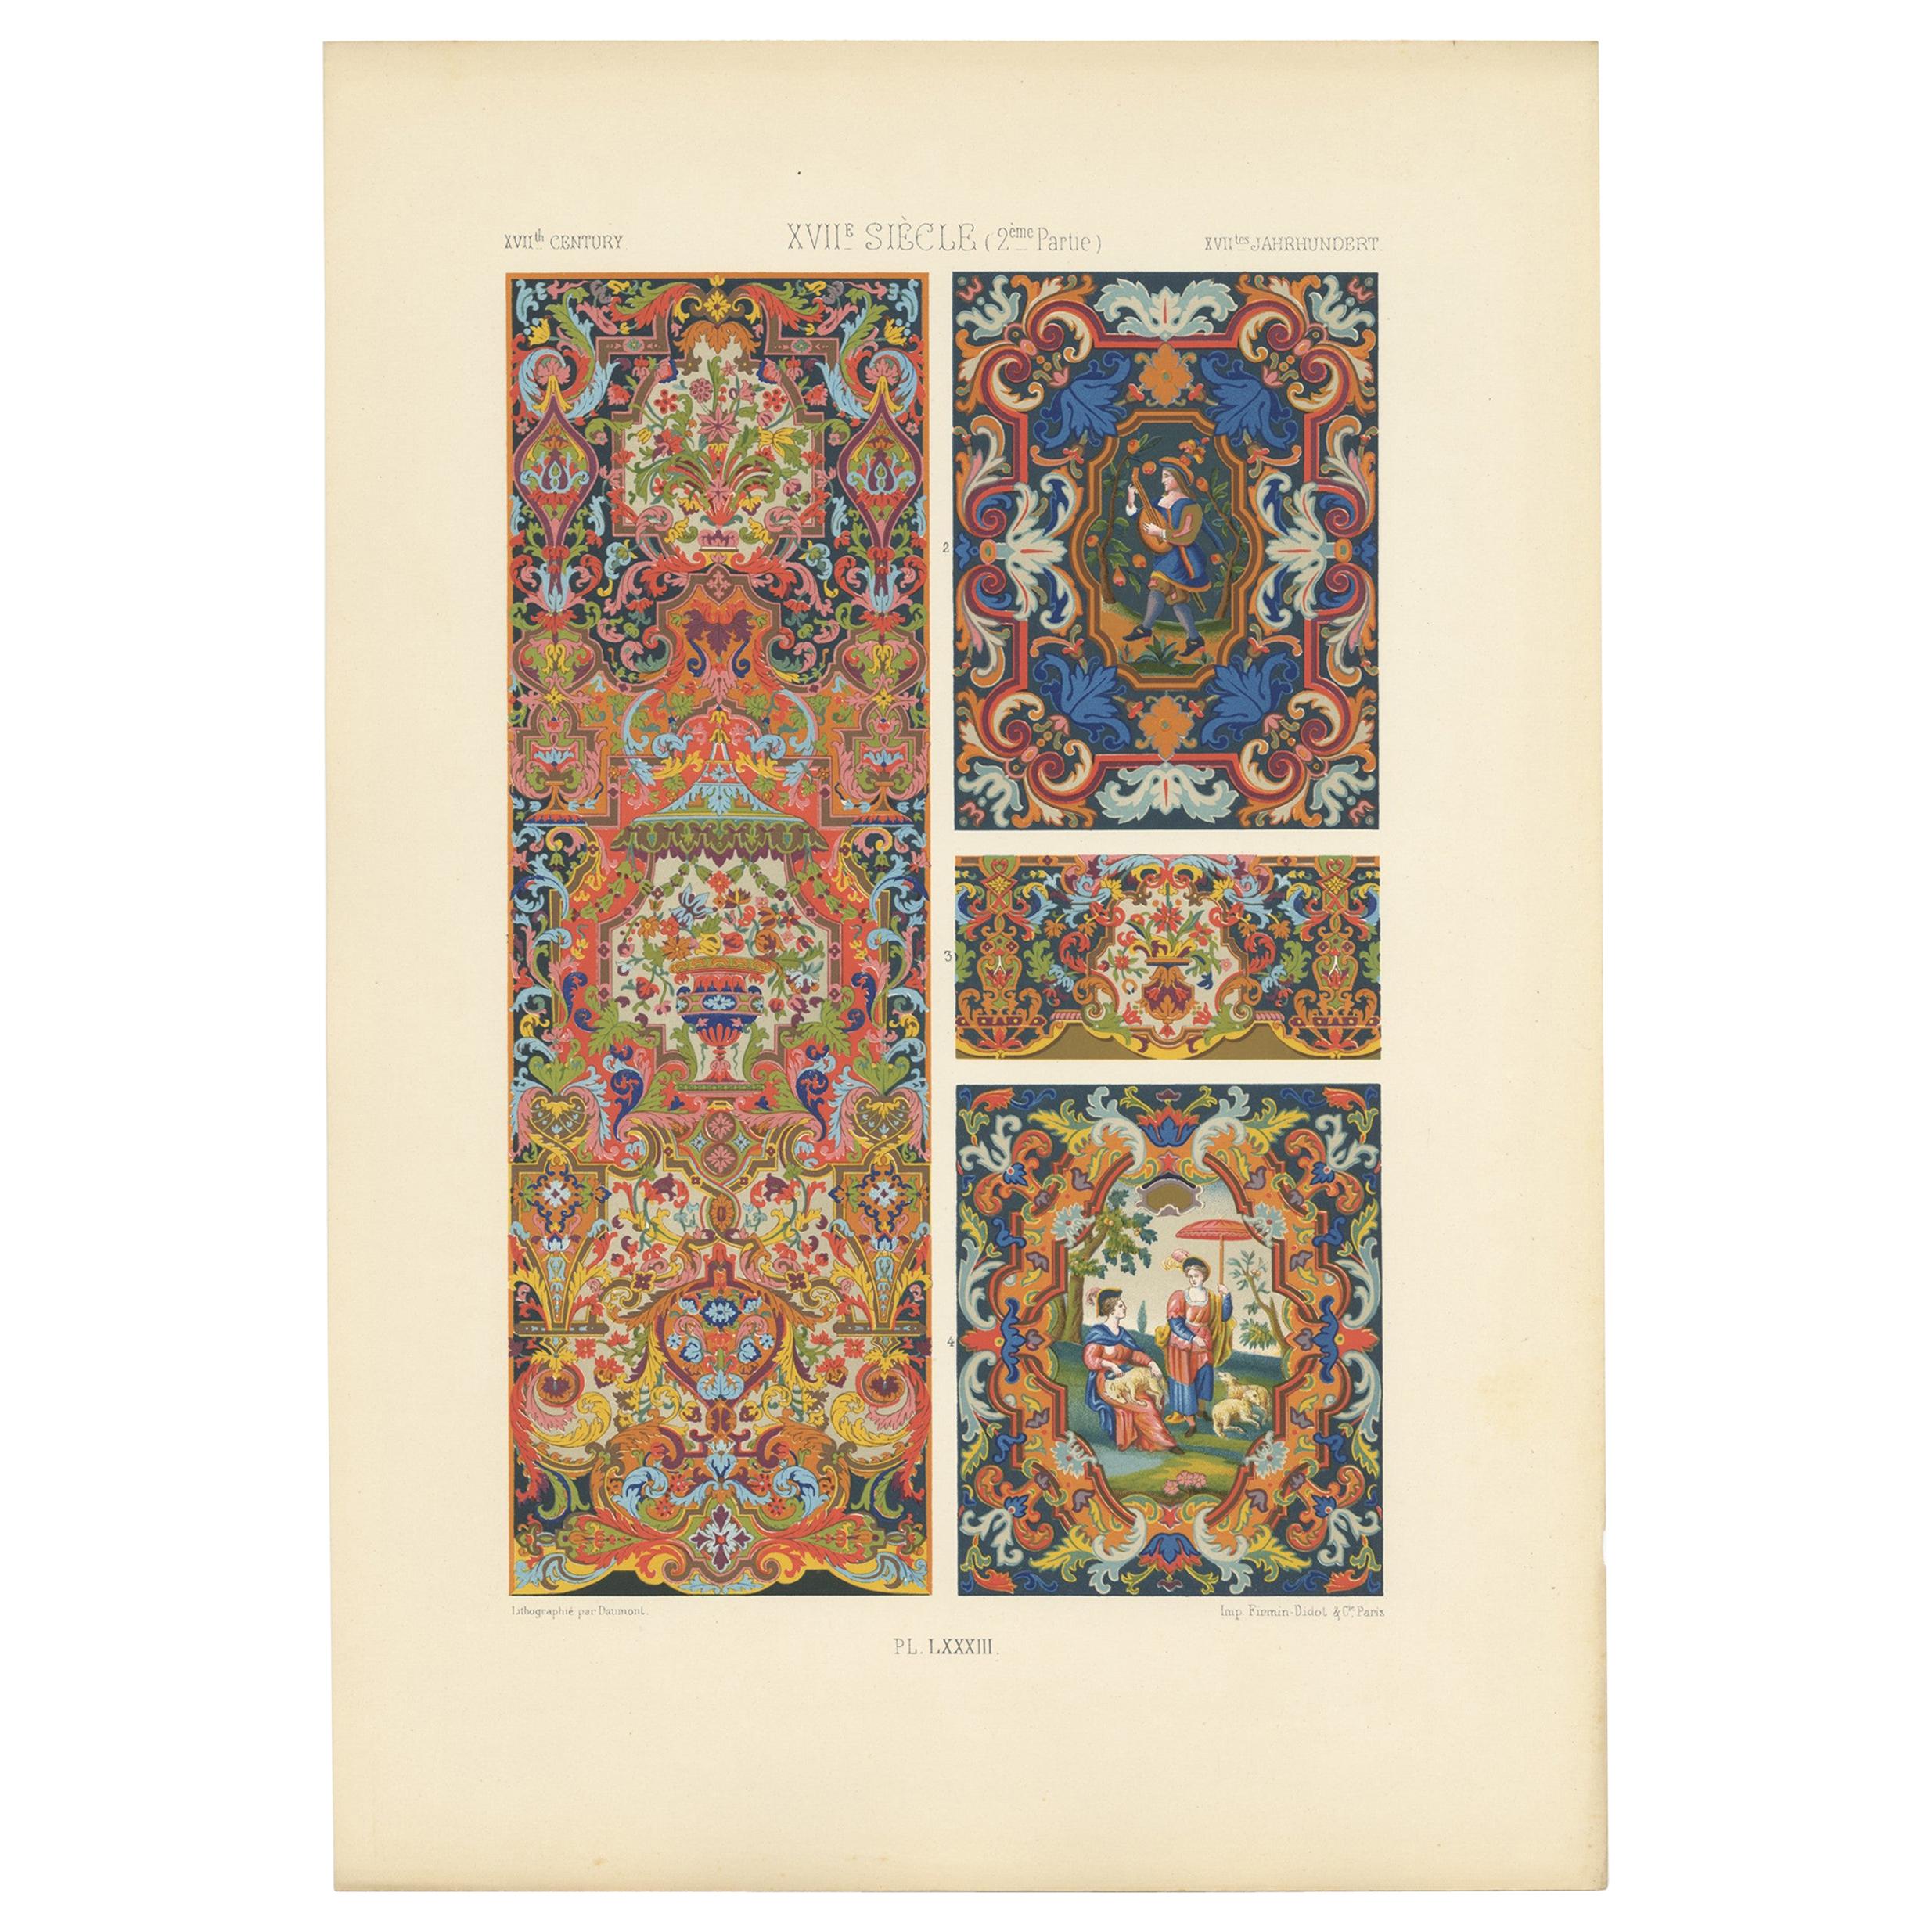 Decorative Antique Print of XVIIth Century Ornaments by Racinet (c.1890) For Sale